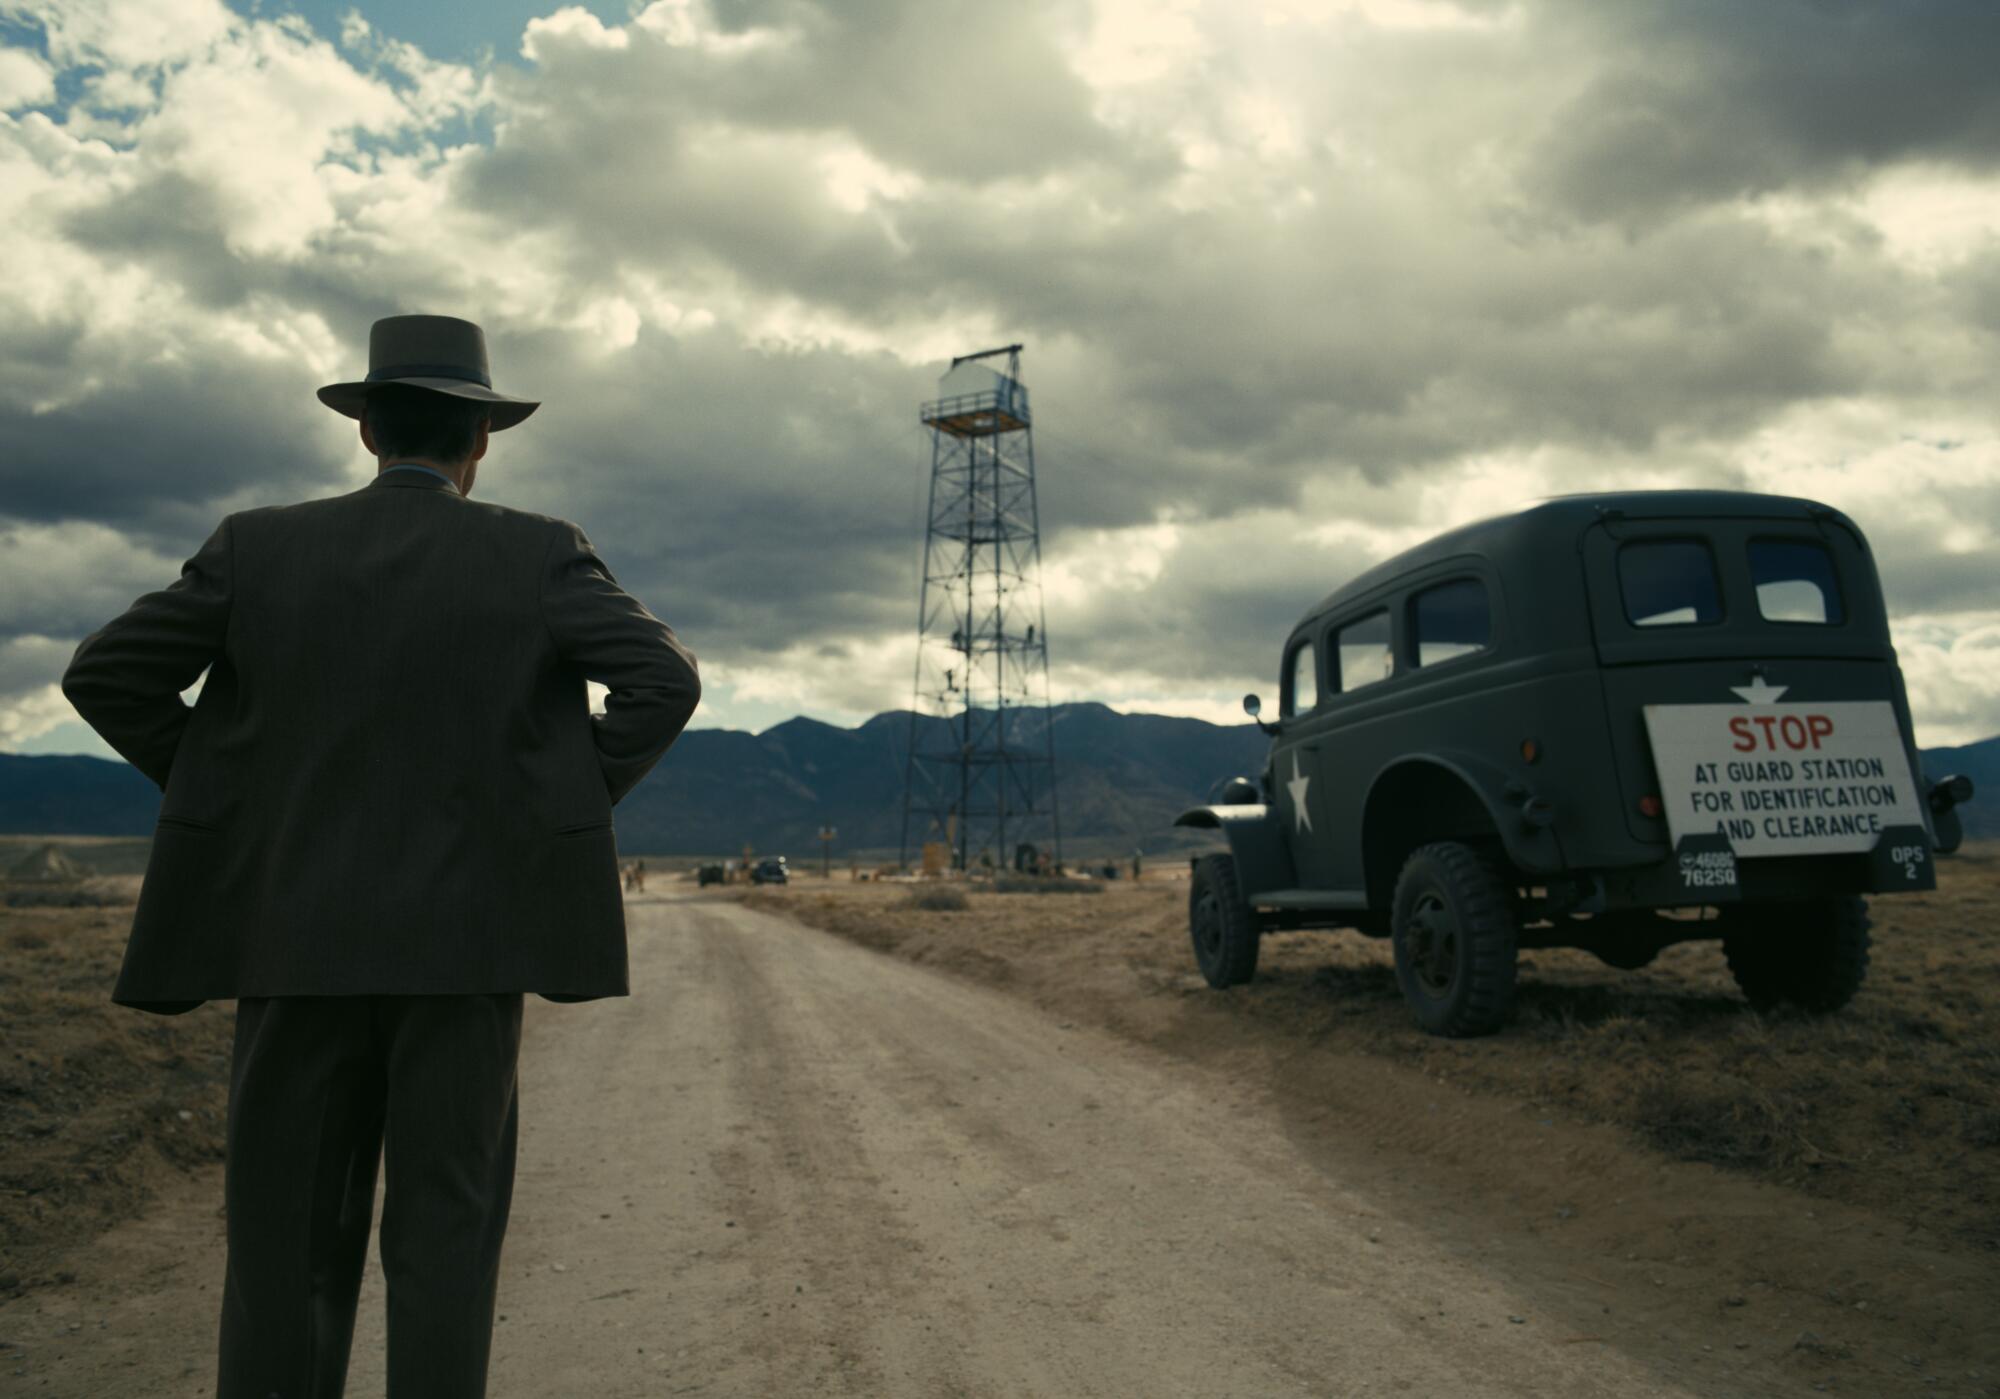 A man in a hat, seen from behind, watches a distant tower from a road, along which is parked a vintage truck.